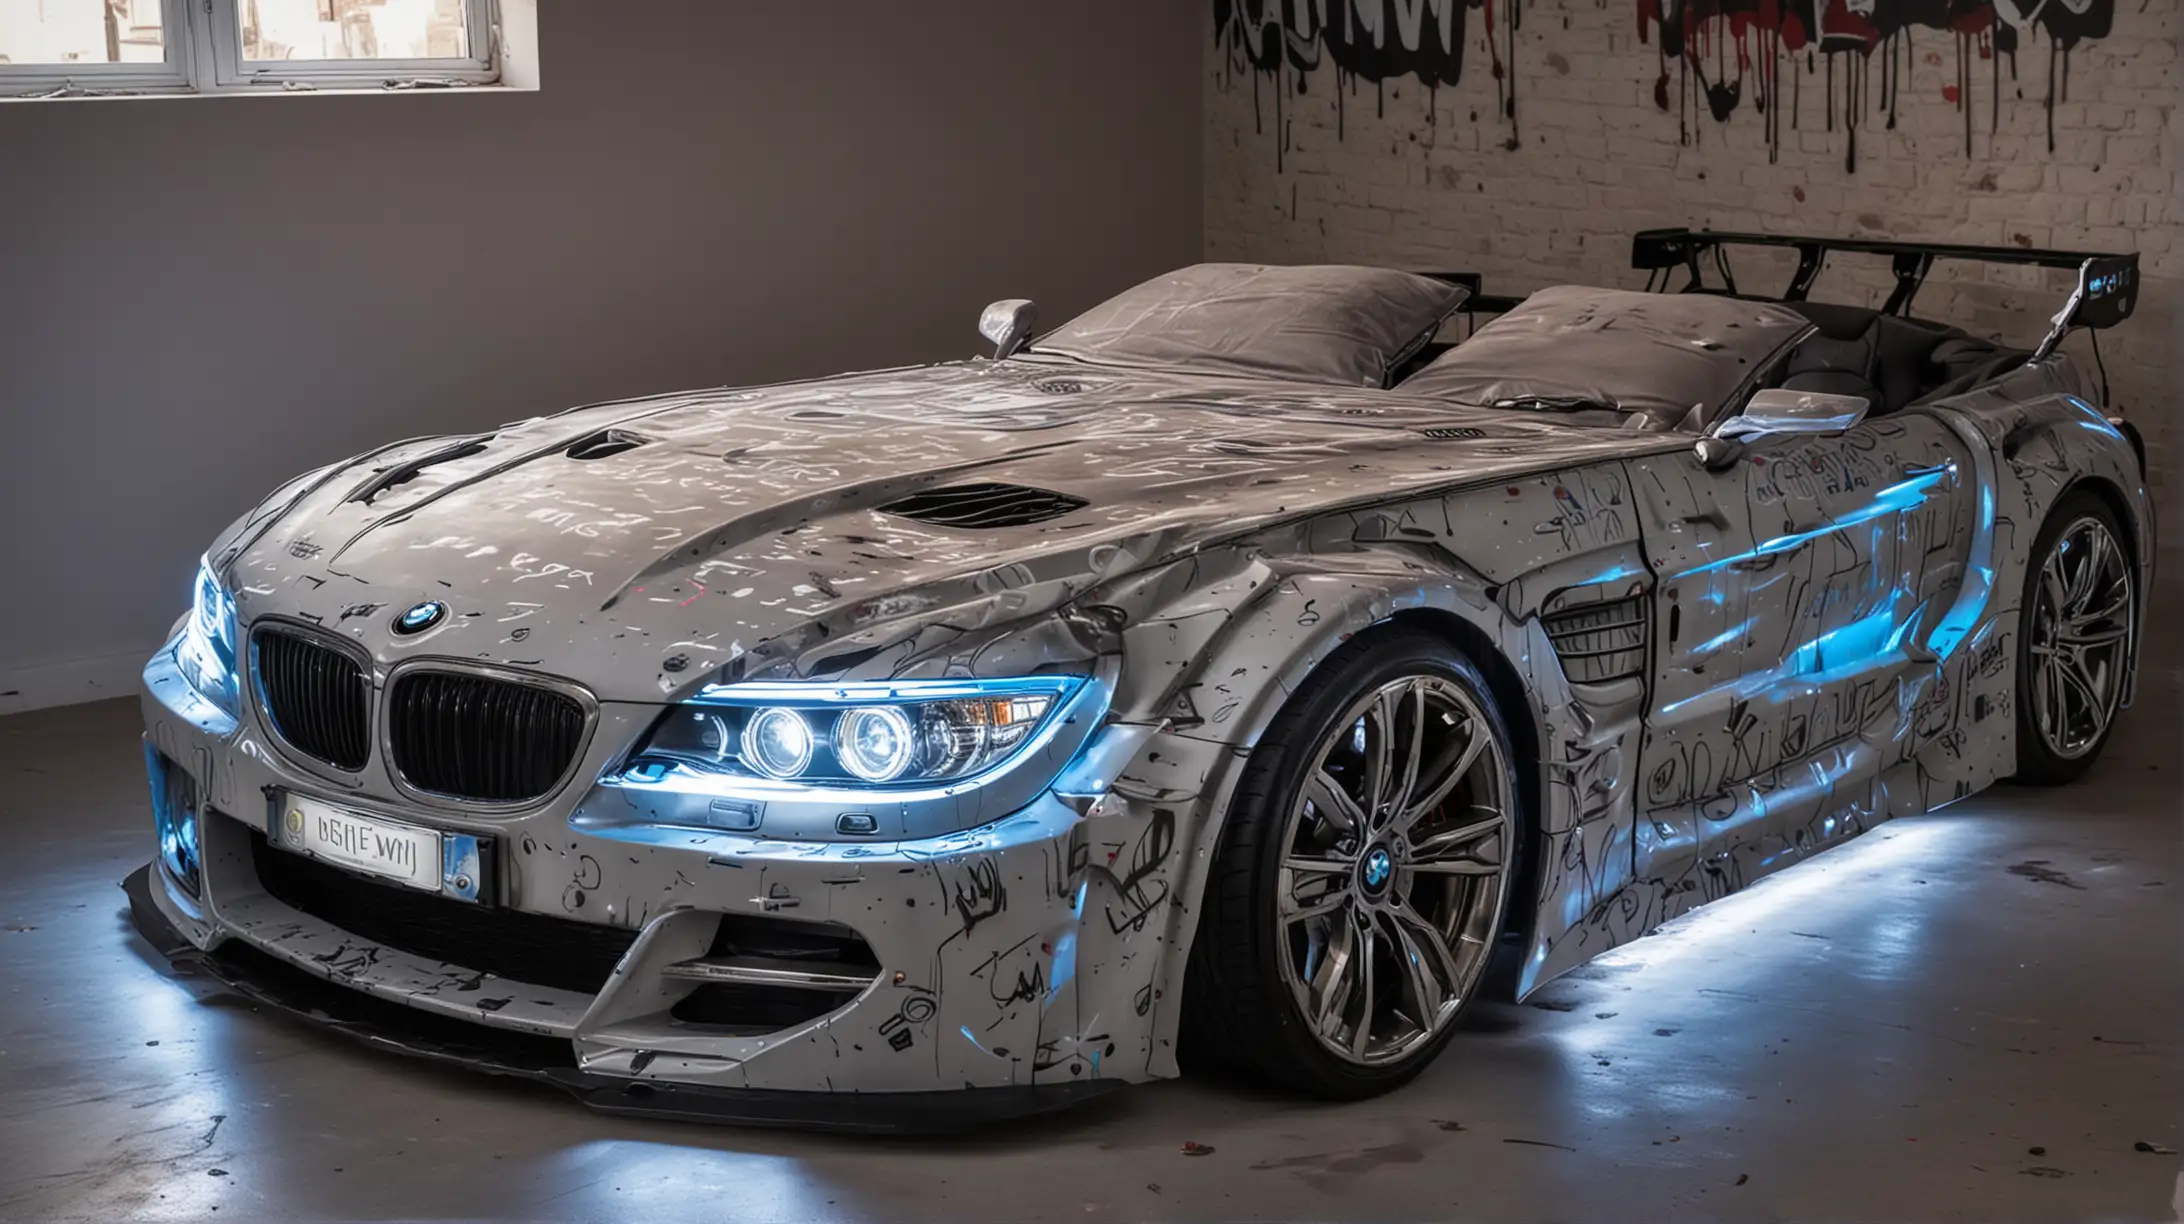 Double bed in the shape of a BMW car with headlights on and RGB graffiti